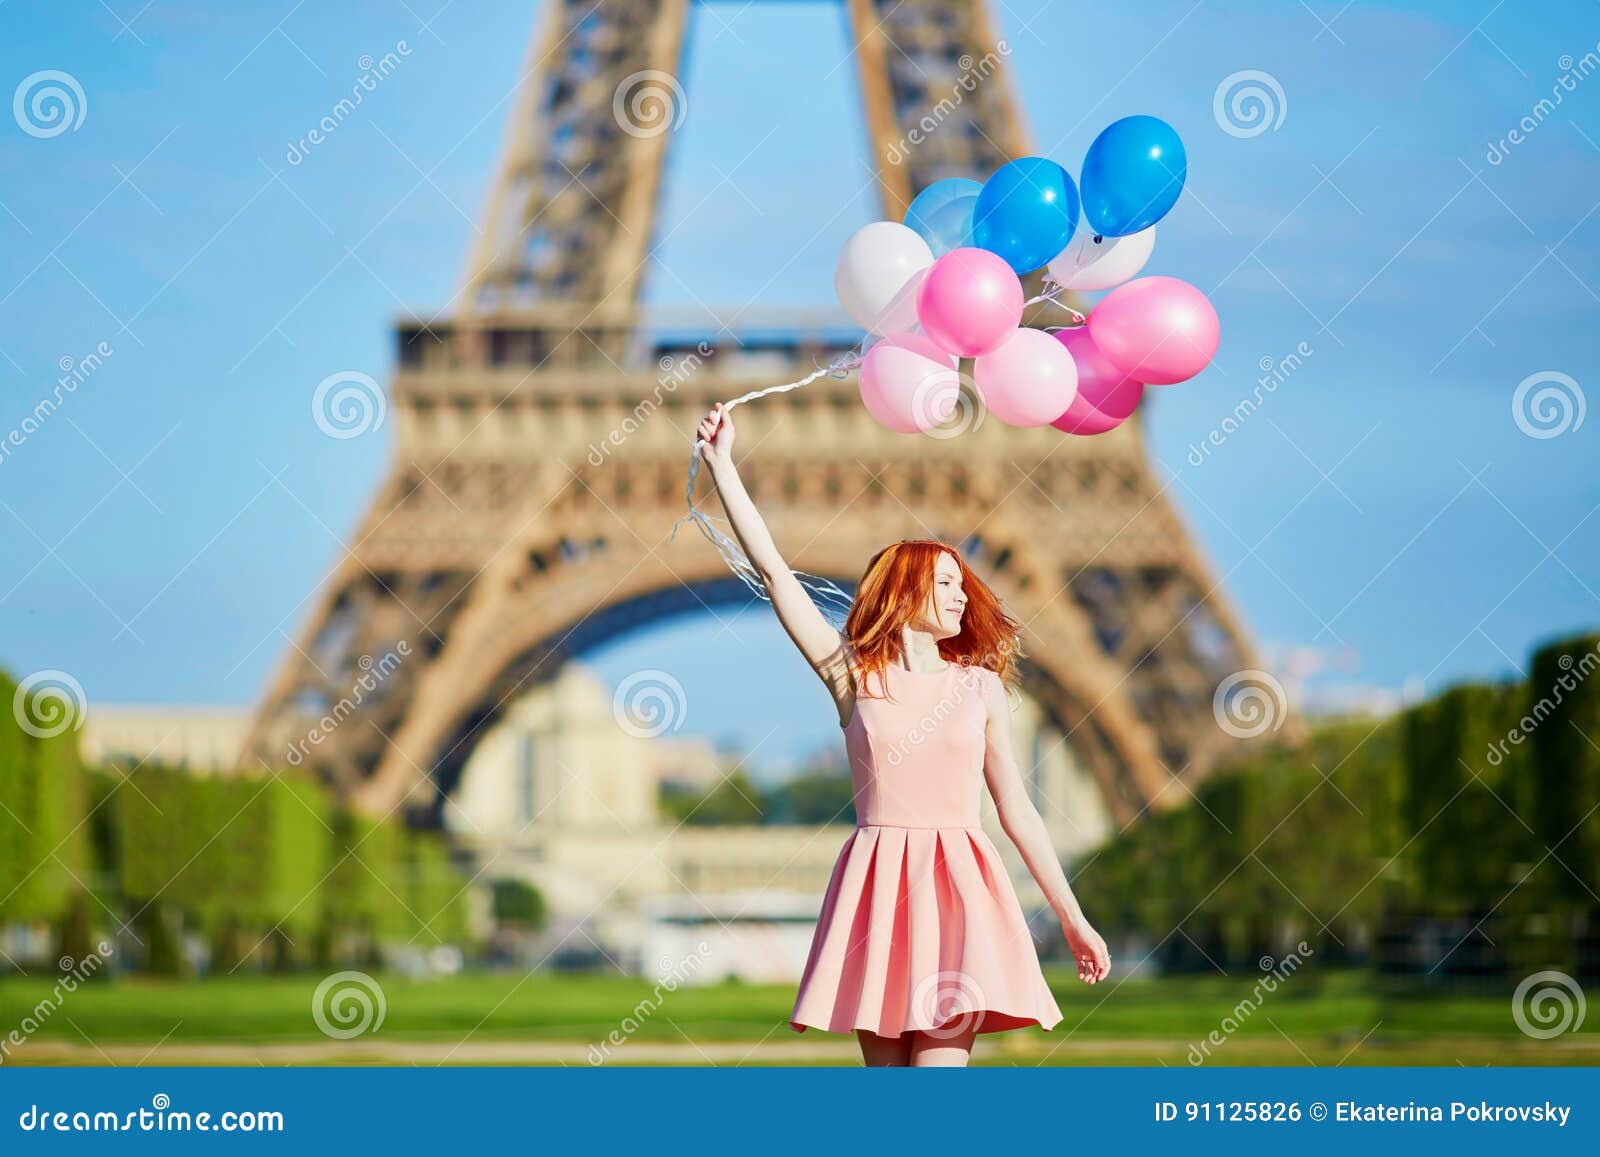 Woman in Pink Dress with Bunch of Balloons Dancing Near the Eiffel ...